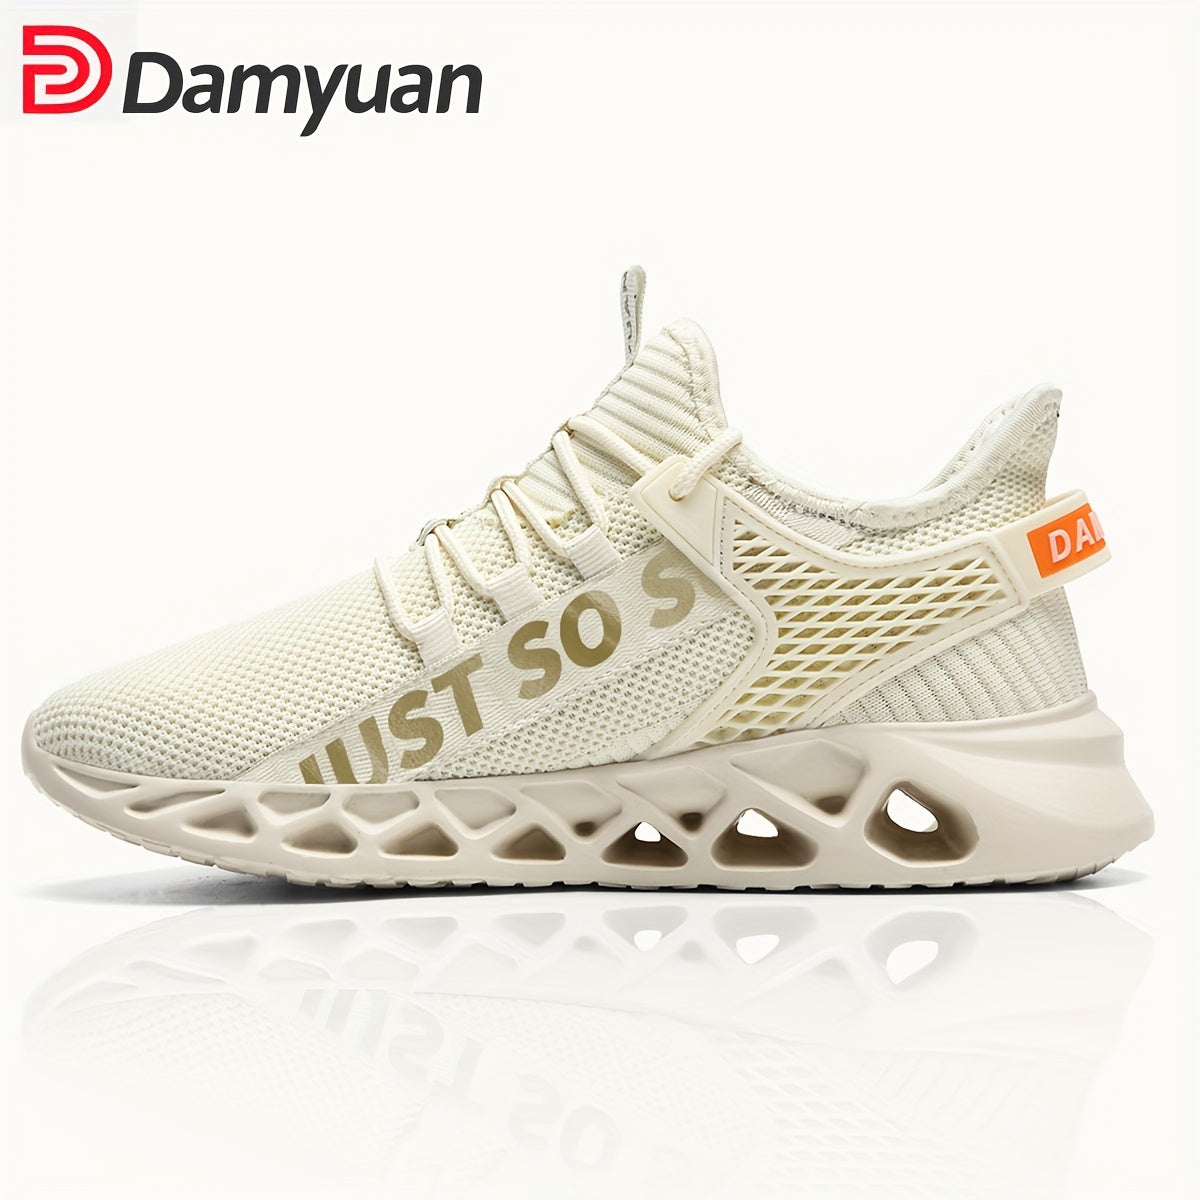 Damyuan Men's Blade Type Shoes, Breathable Shock Absorption Running Shoes Lightweight Non-Slip Shoes For Jogging Tennis Gym, Casual Walking Sneakers